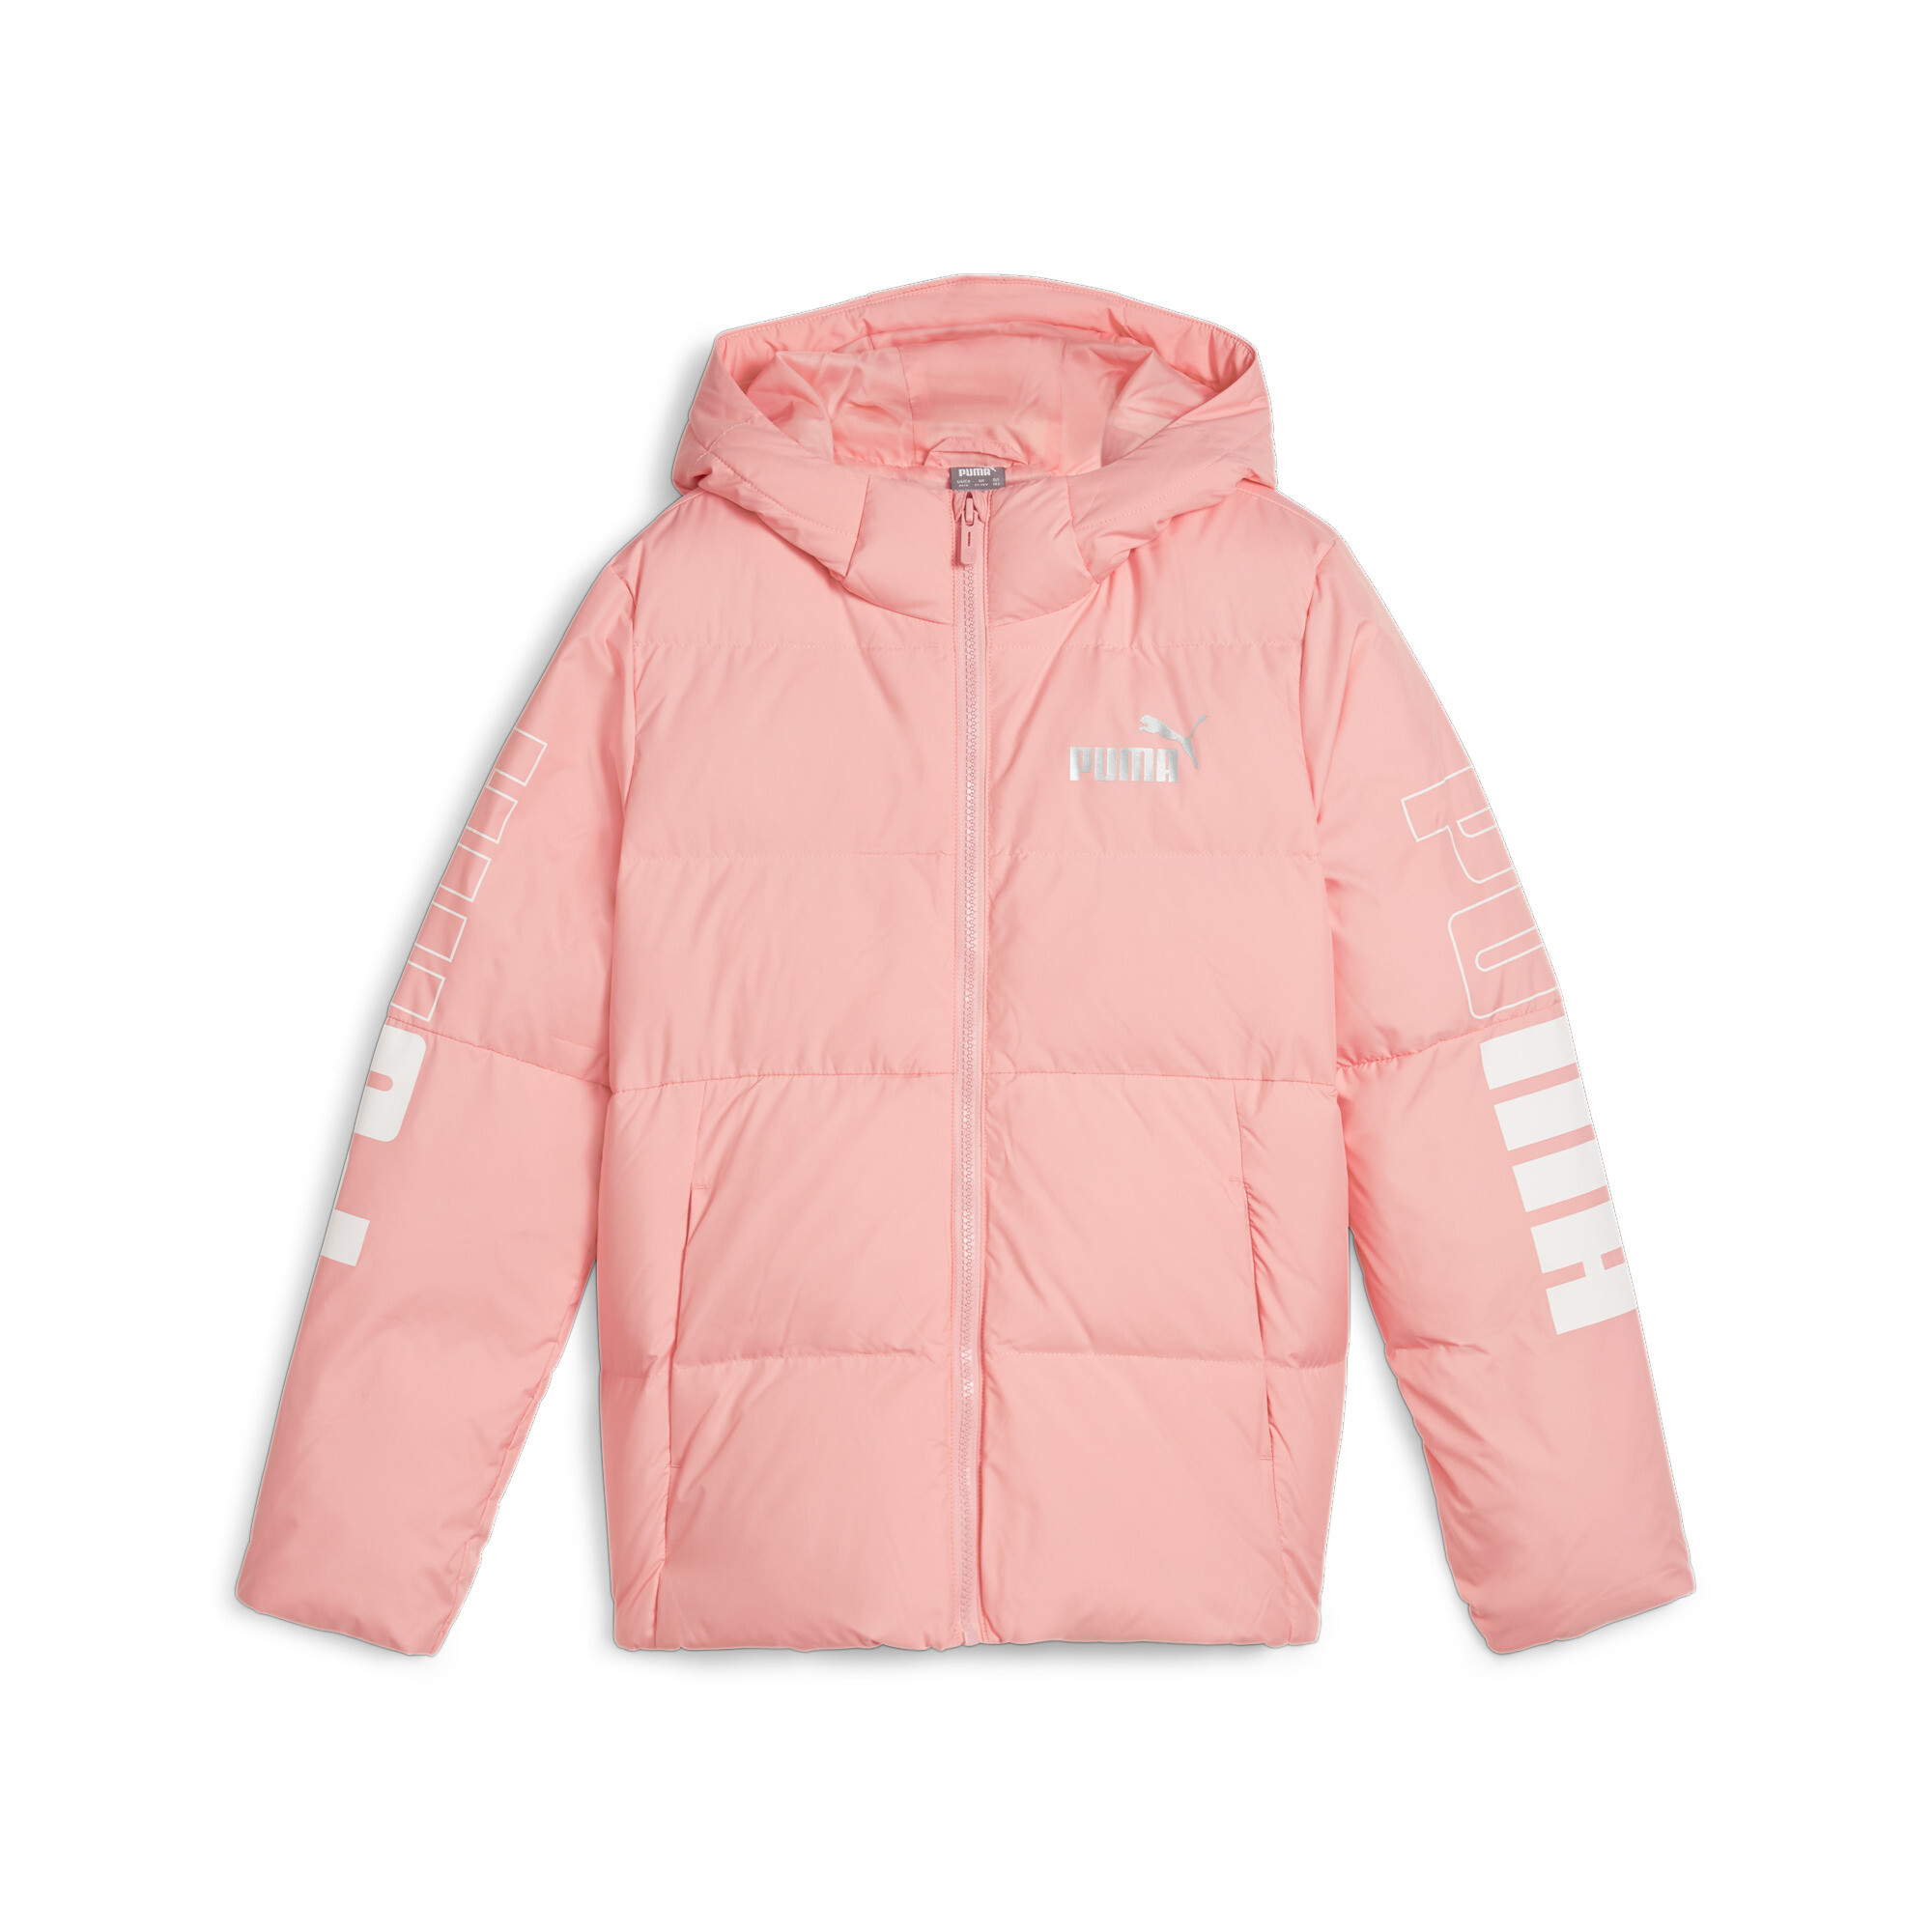 Puma POWER Youth Hooded Jacket, Pink, Size 9-10Y, Clothing